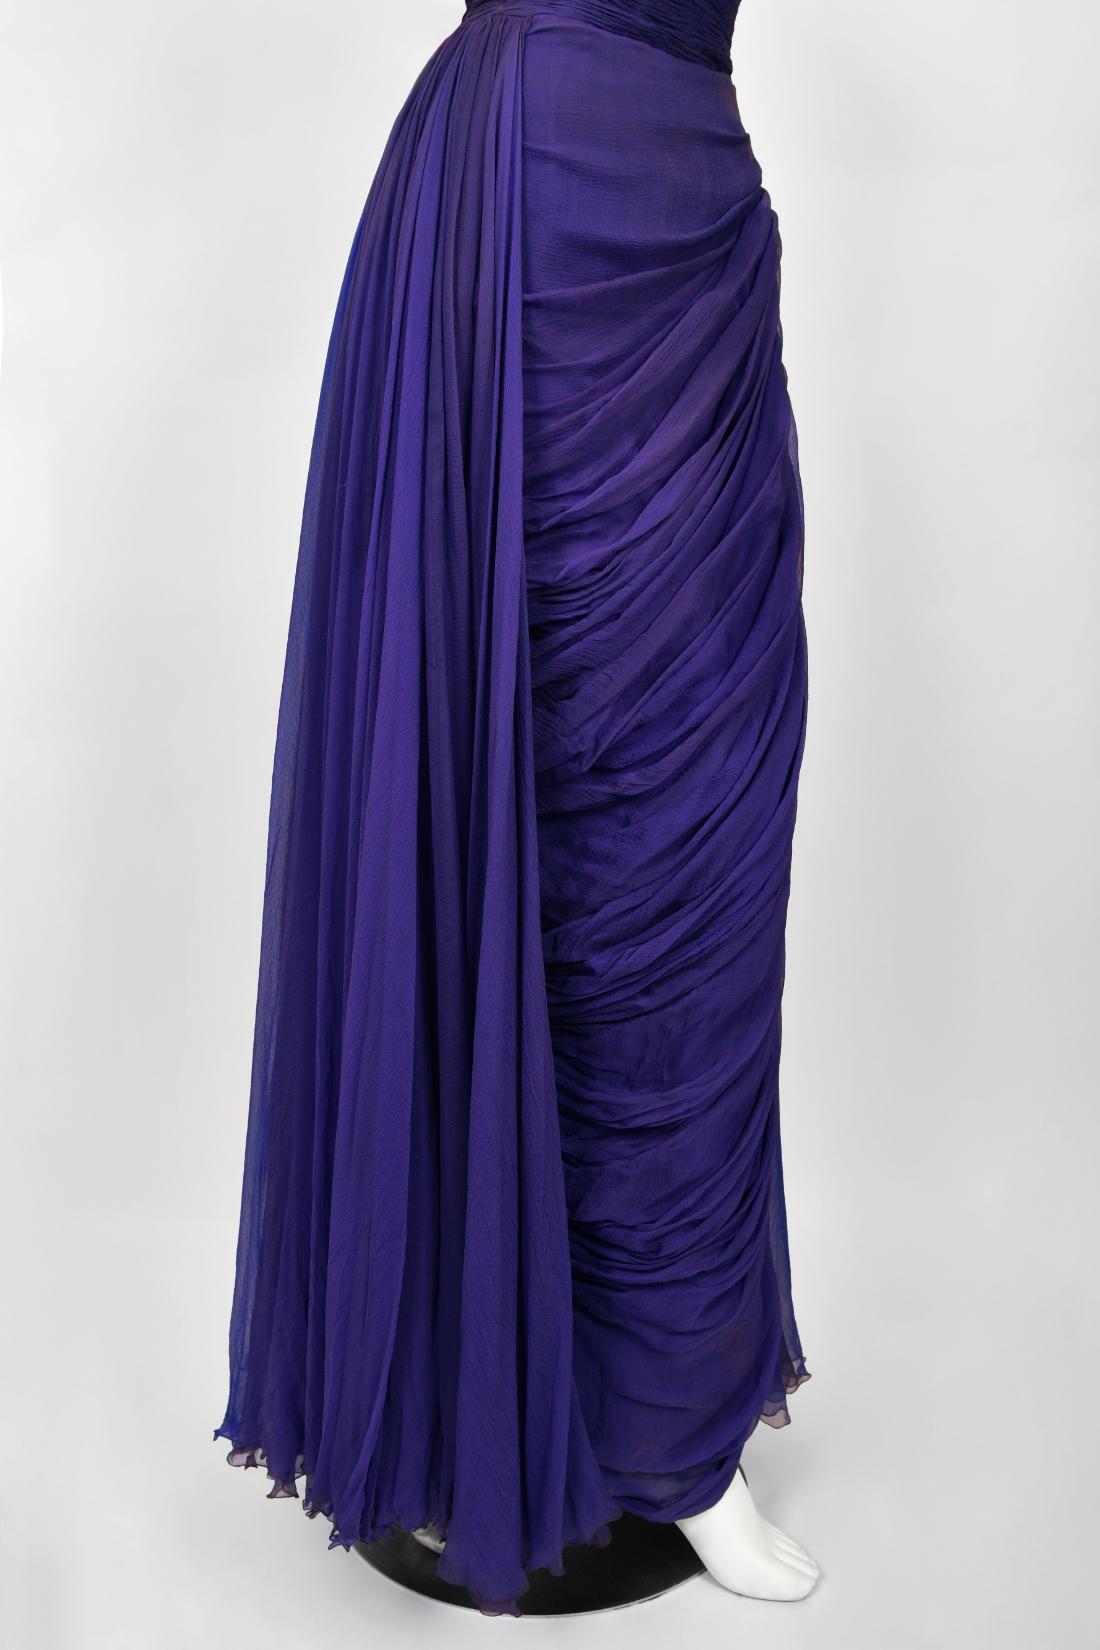 Vintage 1950s Curiel Couture Pleated Purple Silk Chiffon Strapless Goddess Gown  For Sale 4